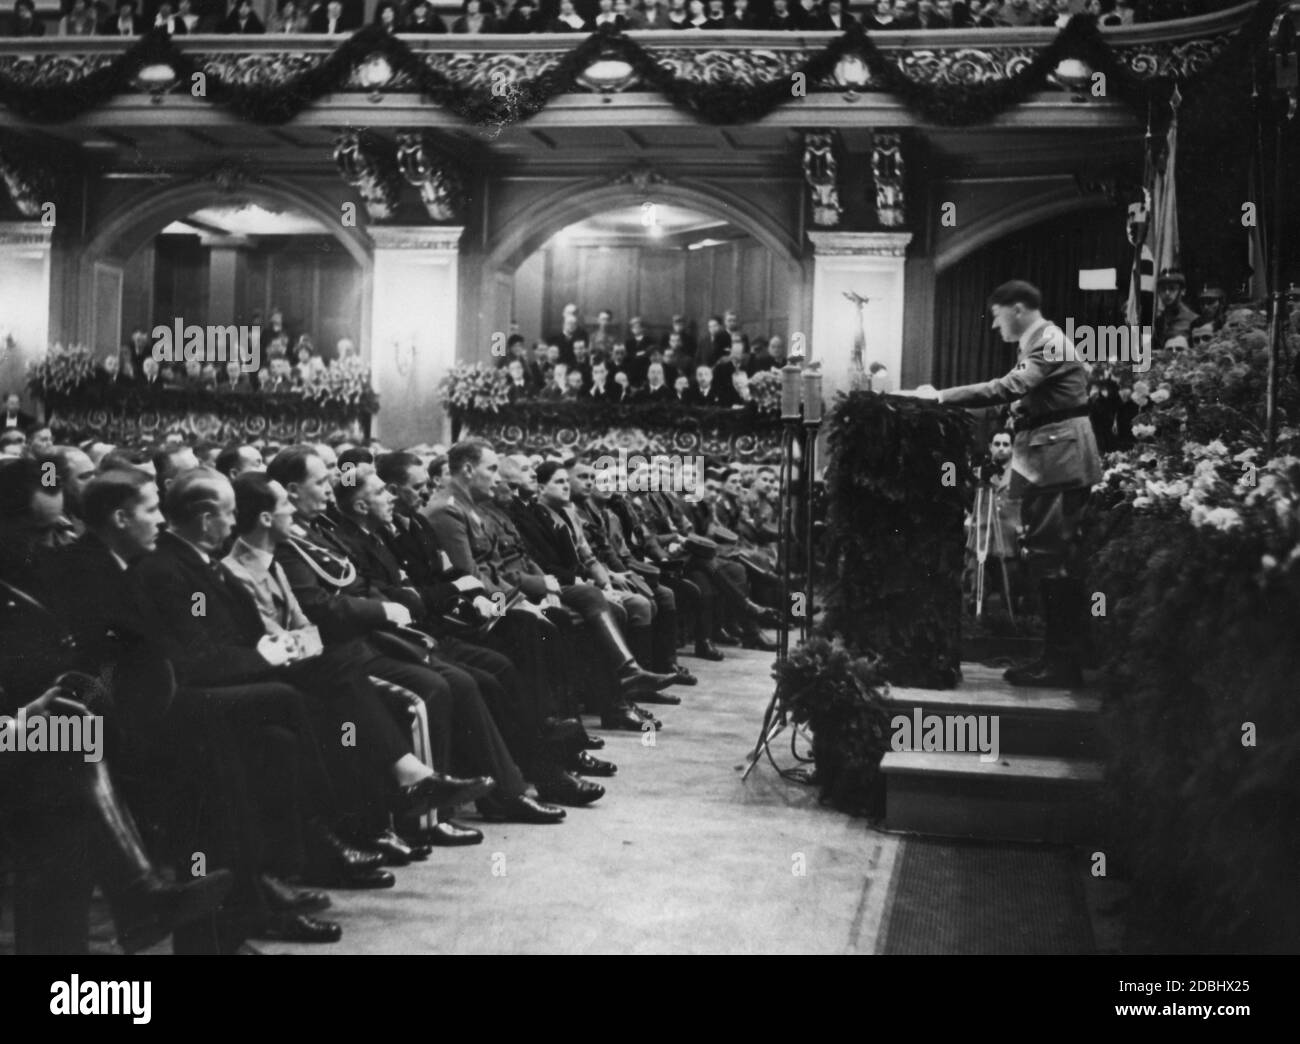 At the proclamation of the constitutions of the Deutsche Studentenschaft (German Student Union) and the Deutsche Fachschulschaft (German Technical Students' Union) by Wilhelm Frick in the Philharmonie, Adolf Hitler gives a speech to the German academic community. Delegations from Berlin and other German colleges, universities and technical colleges, the rectors of all German colleges and universities and representatives of the district administrations and local groups of the NSDStB attended the event. In the 1st row from left  Johann Ludwig Graf Schwerin von Krosigk, Paul Eltz von Ruebenach, Stock Photo